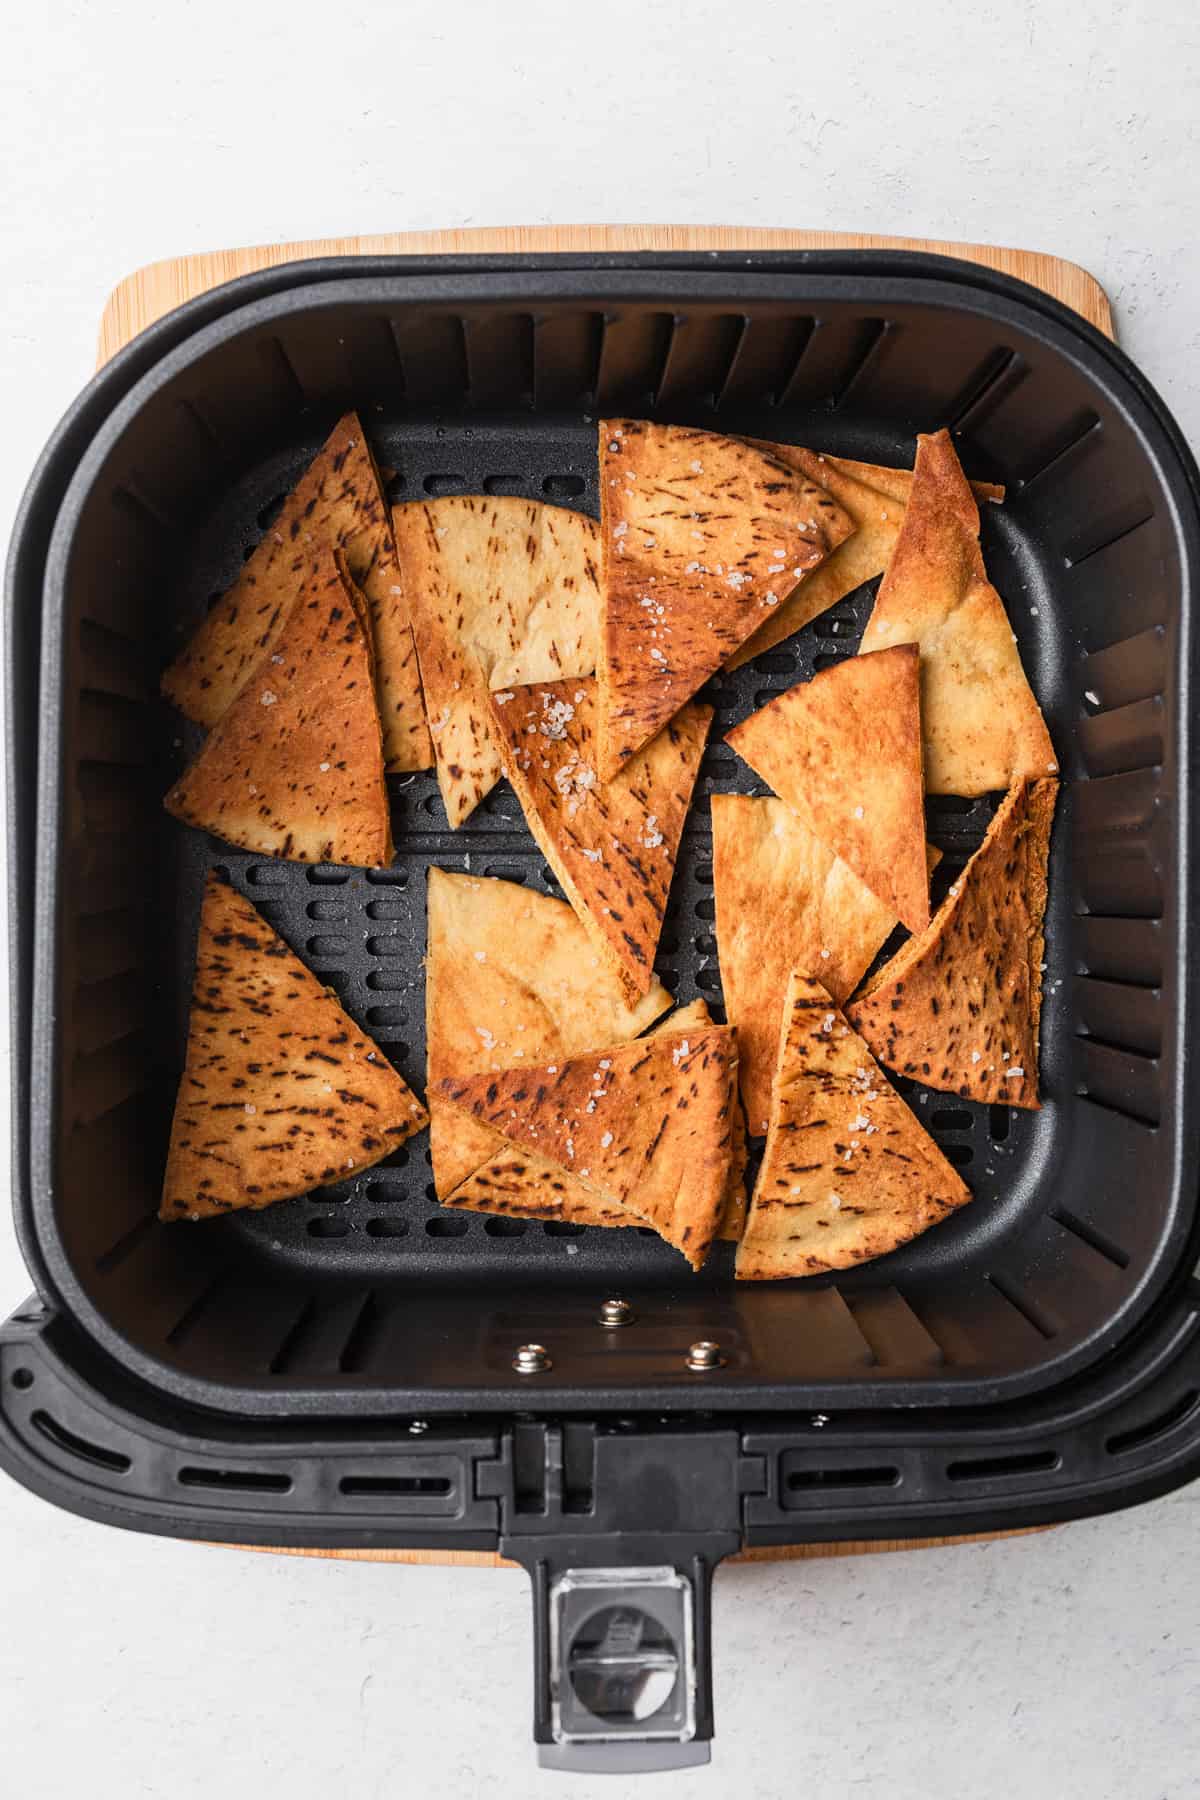 Pita triangles after air frying.